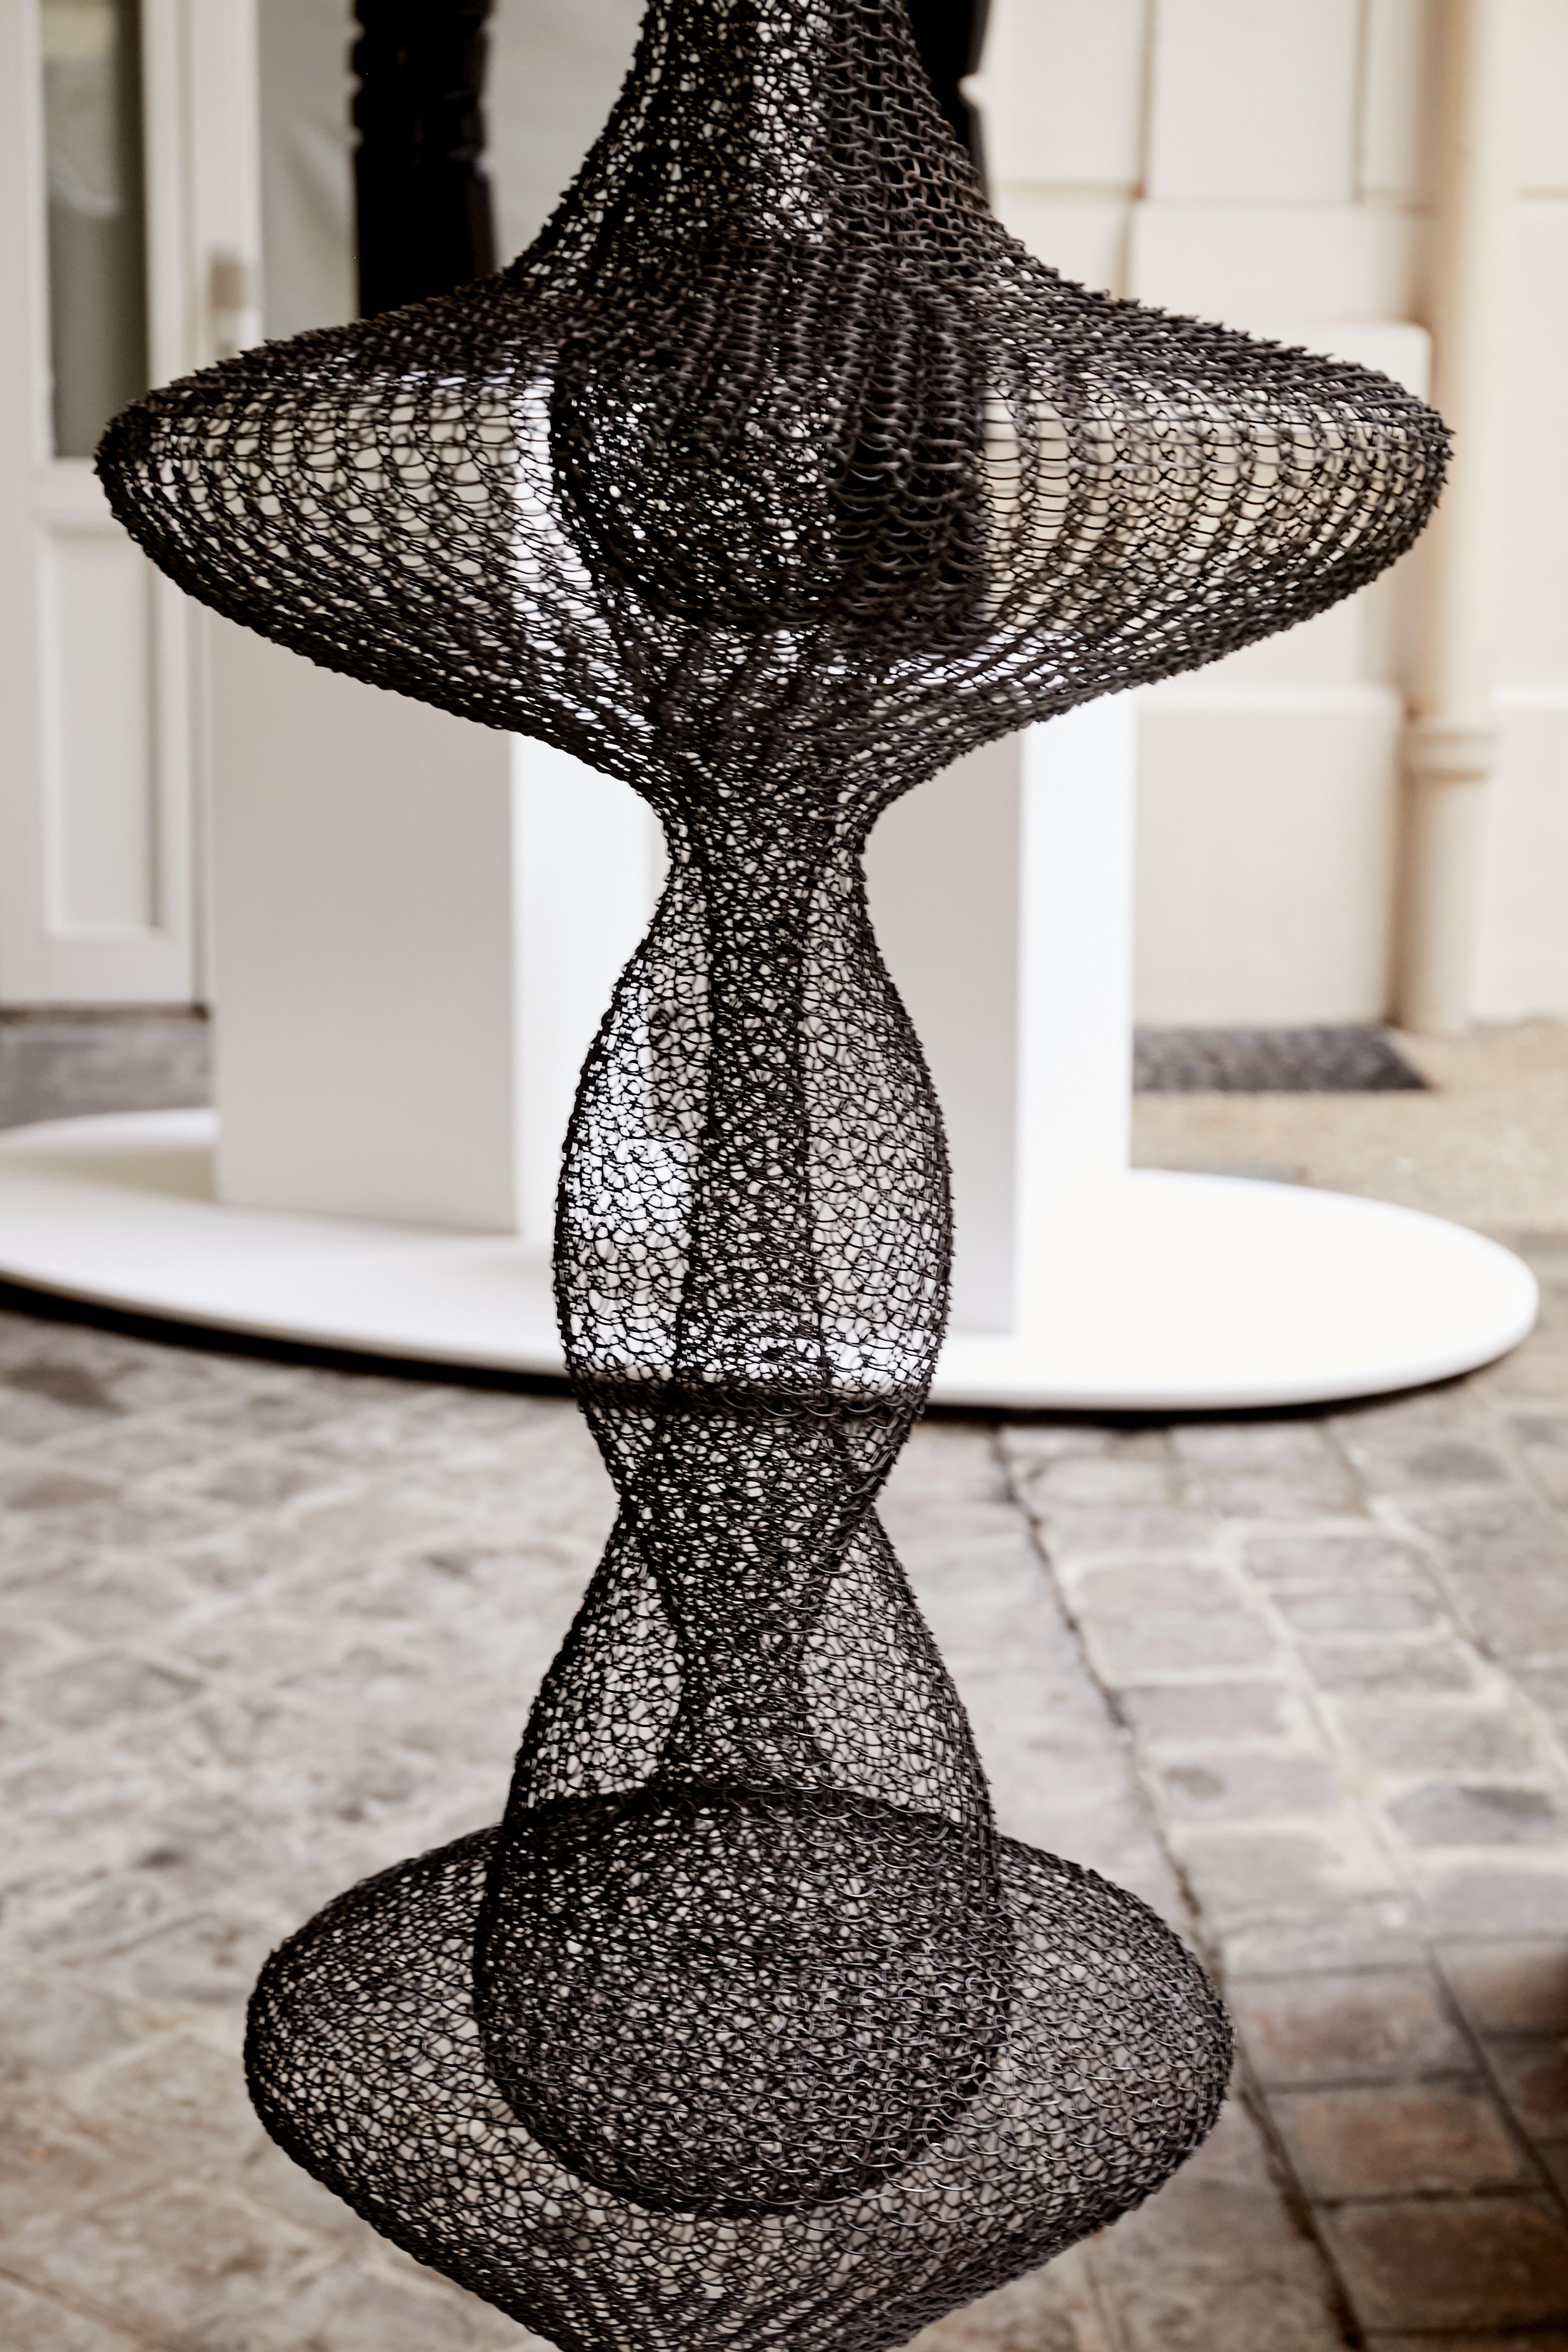 French Contemporary Hand-Woven Wire Sculpture by Ulrikk Dufossé, 2021